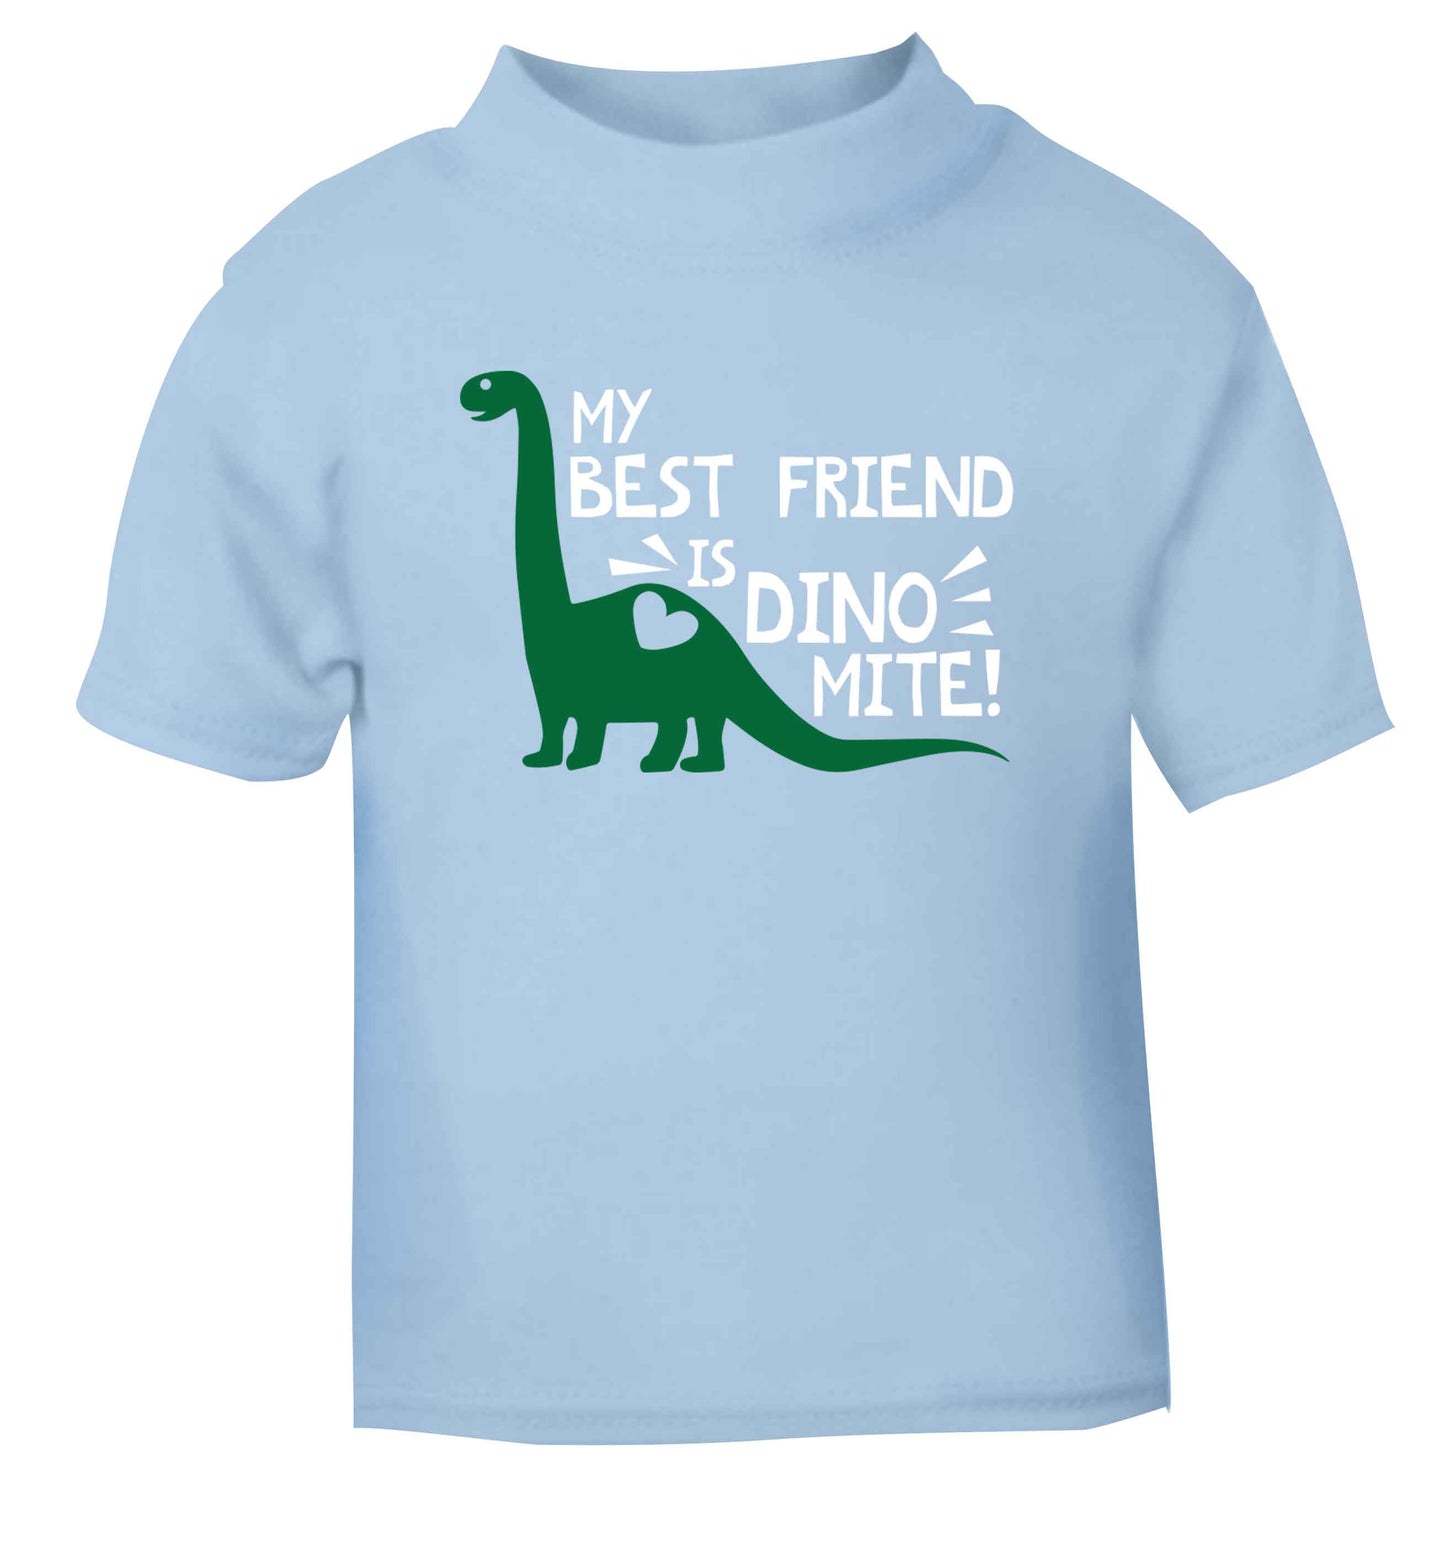 My cousin is dinomite! light blue Baby Toddler Tshirt 2 Years